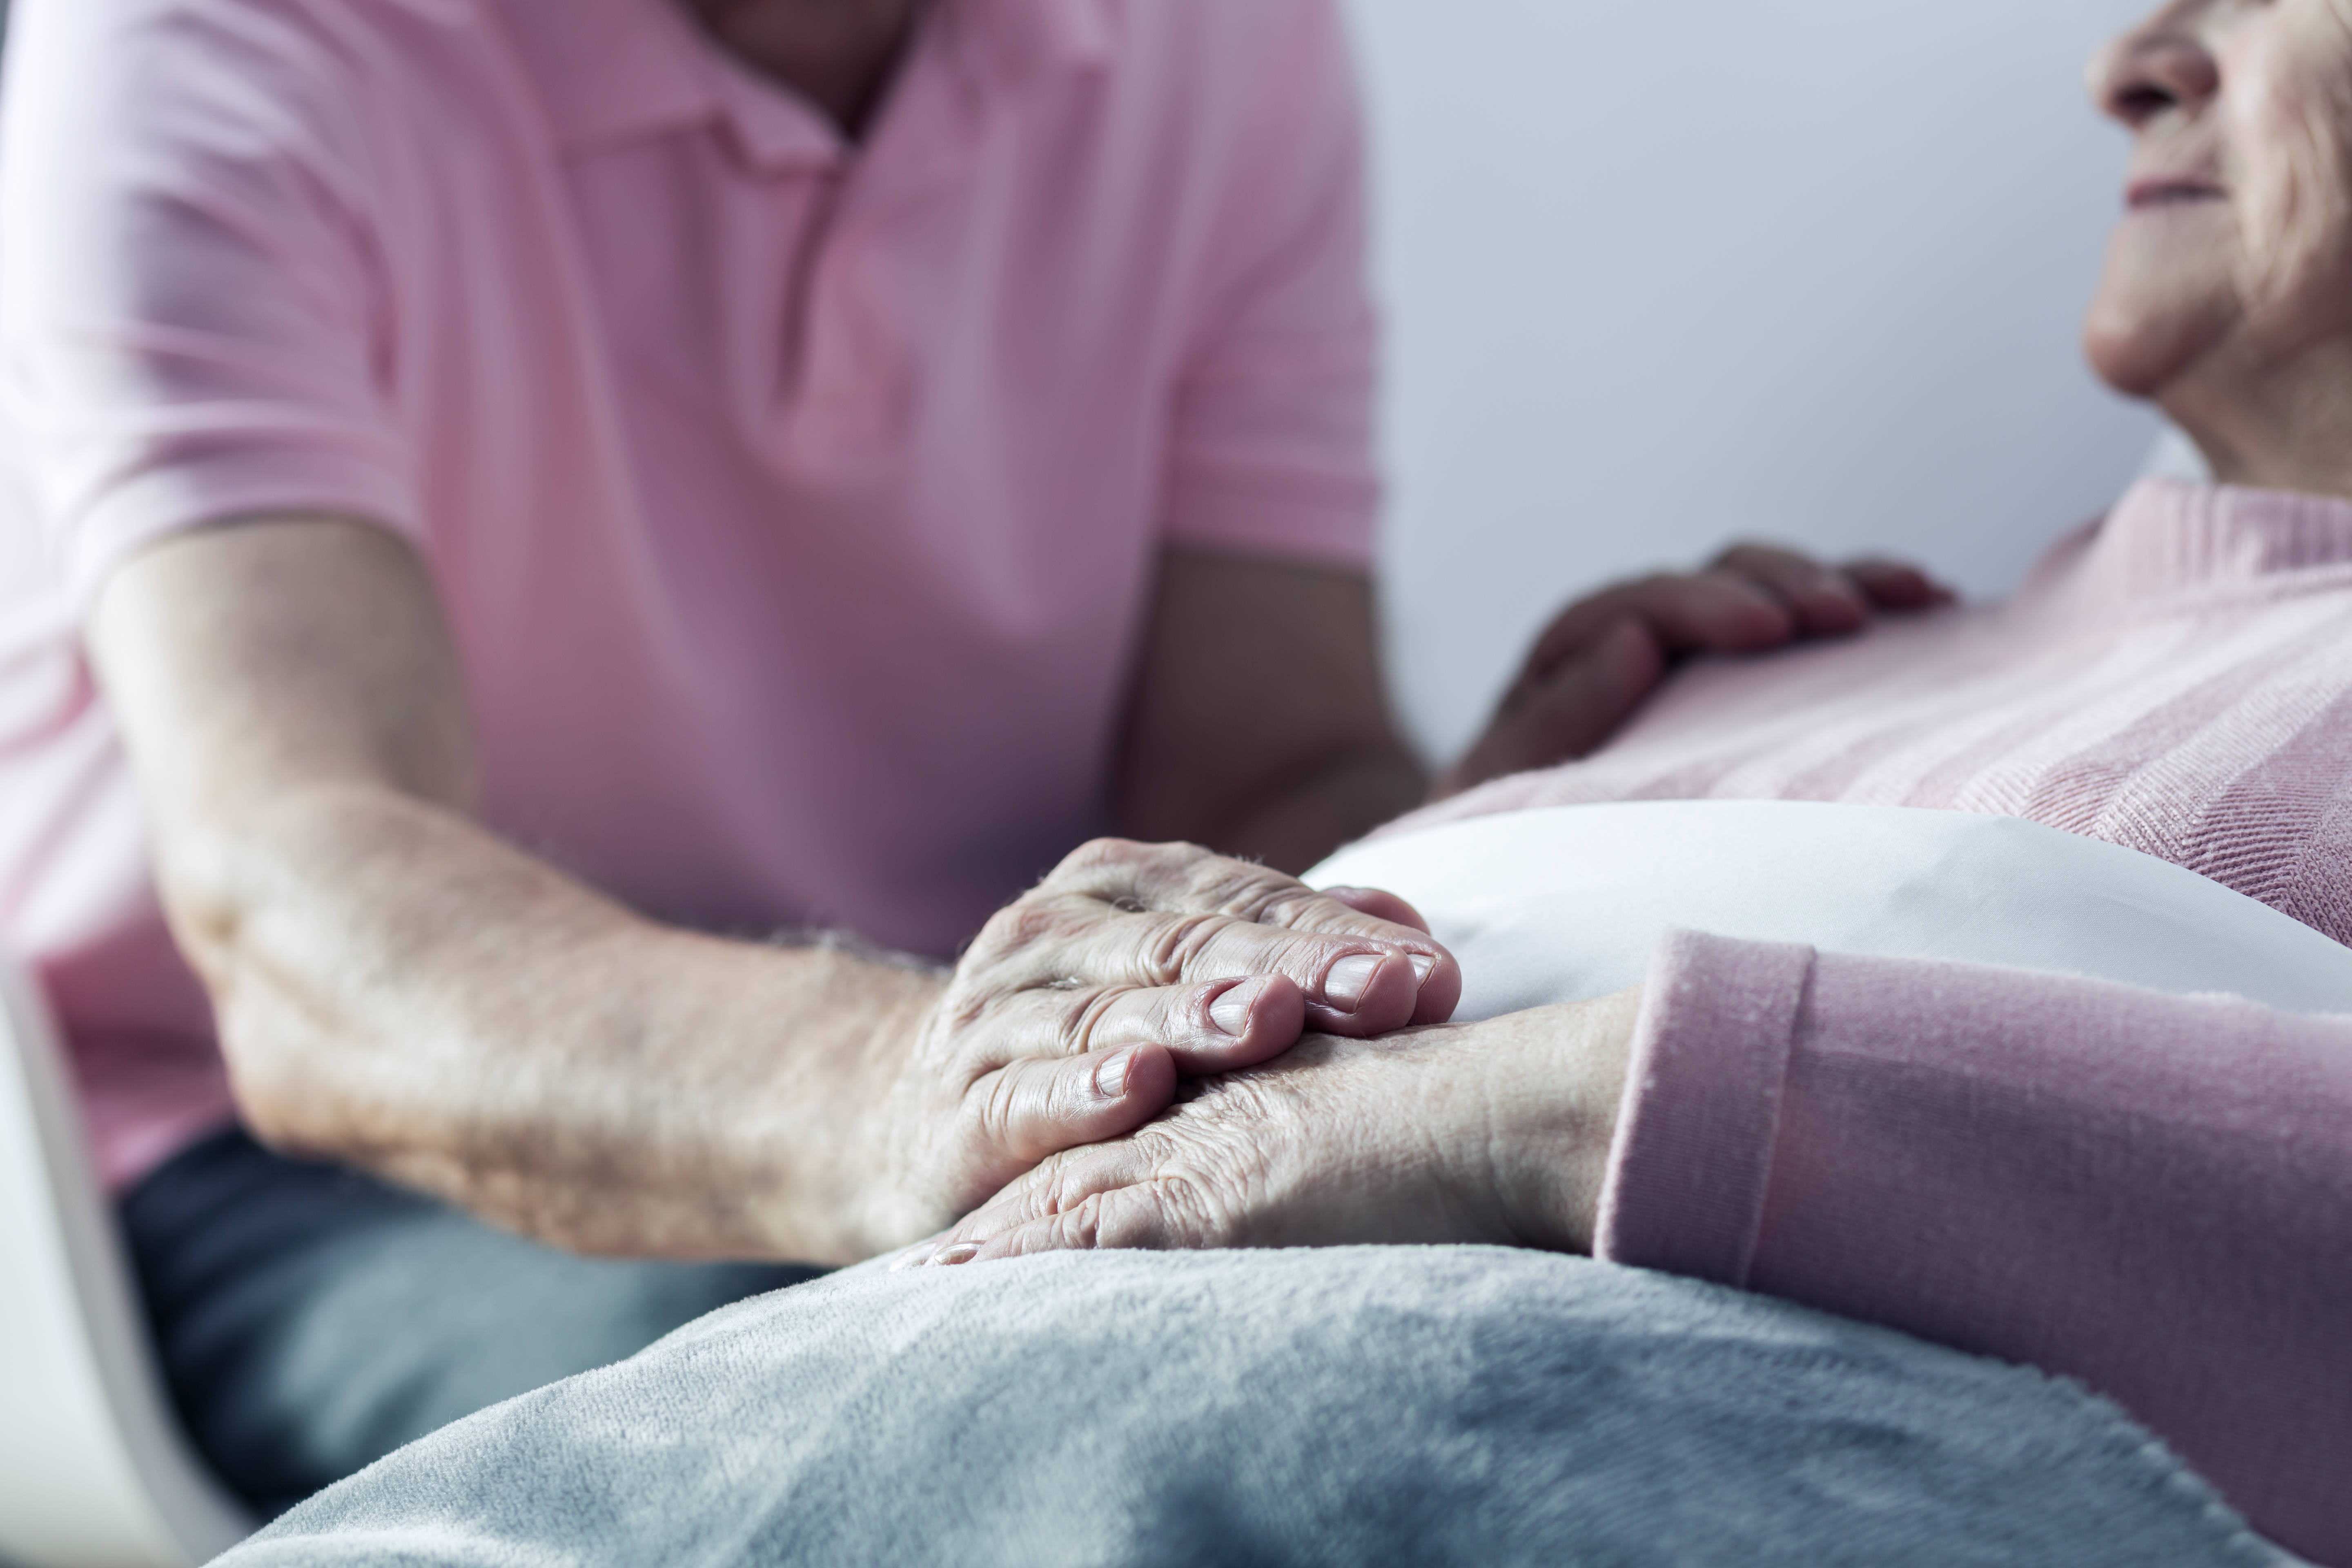 man touching the hand of older person lying in bed